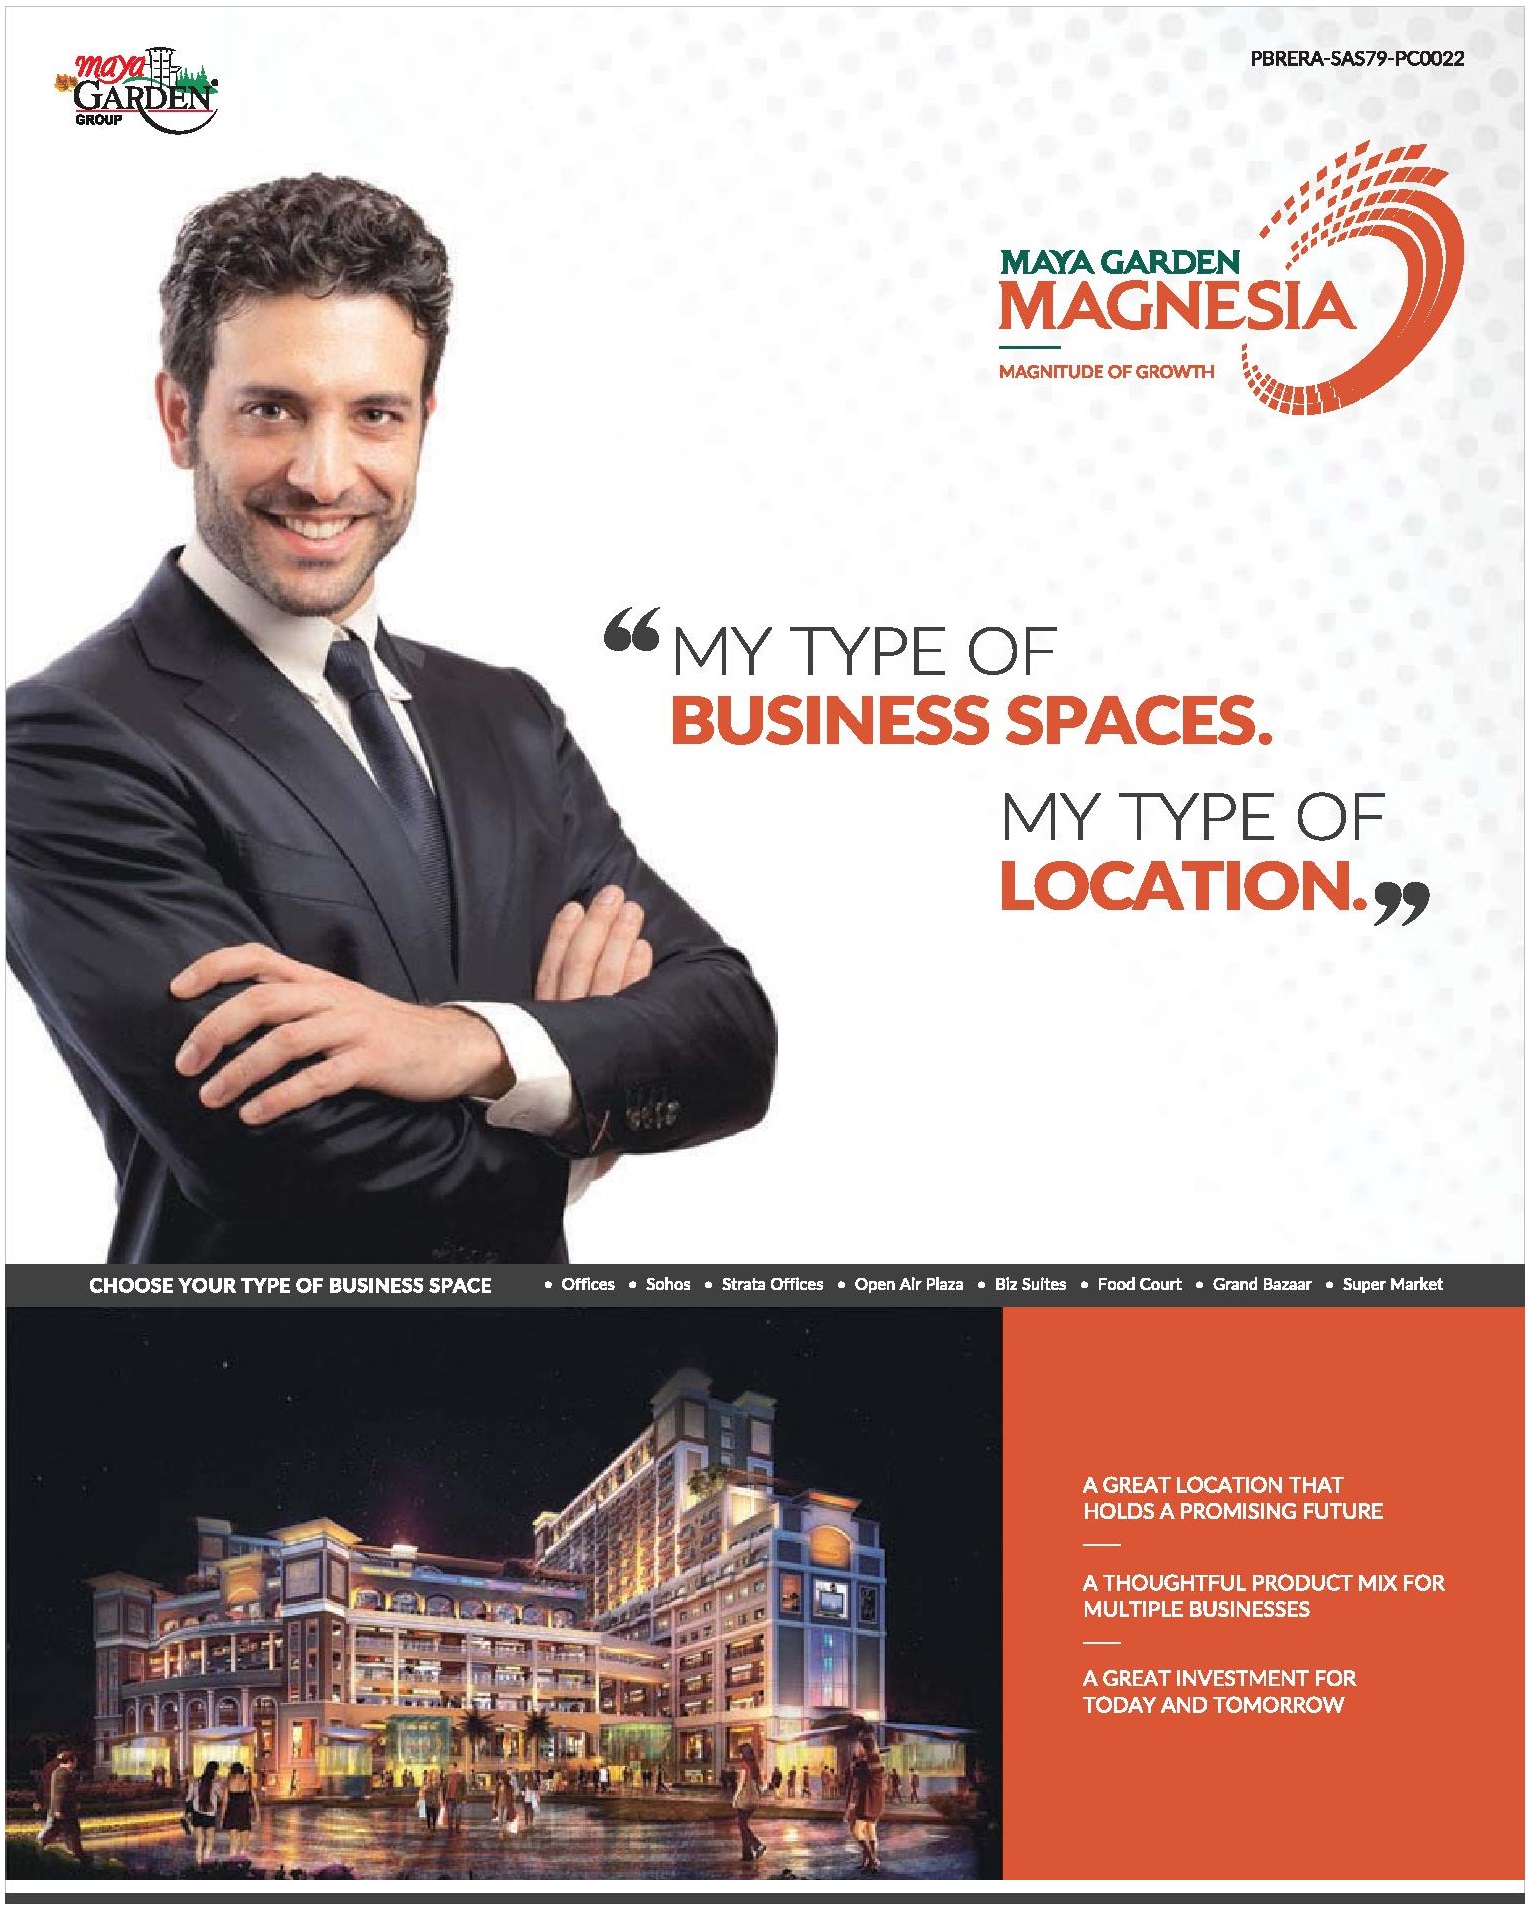 Book your type of business space at Maya Garden Magnesia in Chandigarh Update